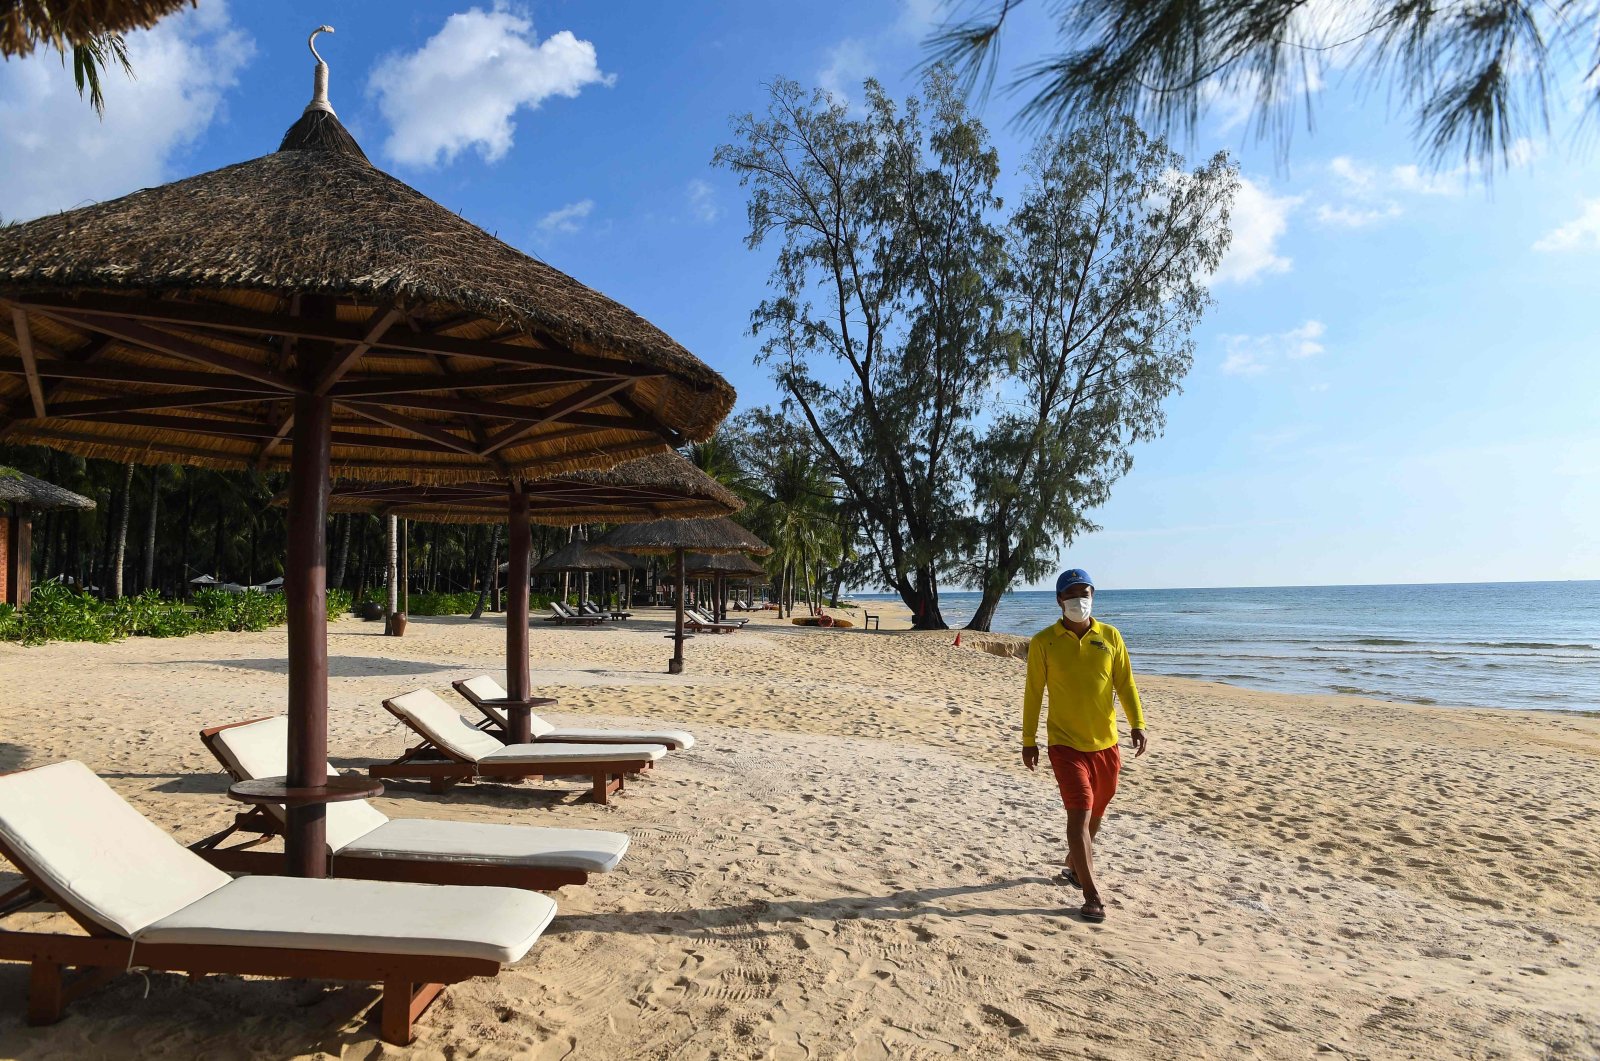 A lifeguard walks along the beach in the Vinpearl leisure complex as the island prepares for its first international tourists to arrive after a COVID-19 vaccine passport scheme kicked off this month, Phu Quoc, Vietnam, Nov. 19, 2021. (AFP Photo)